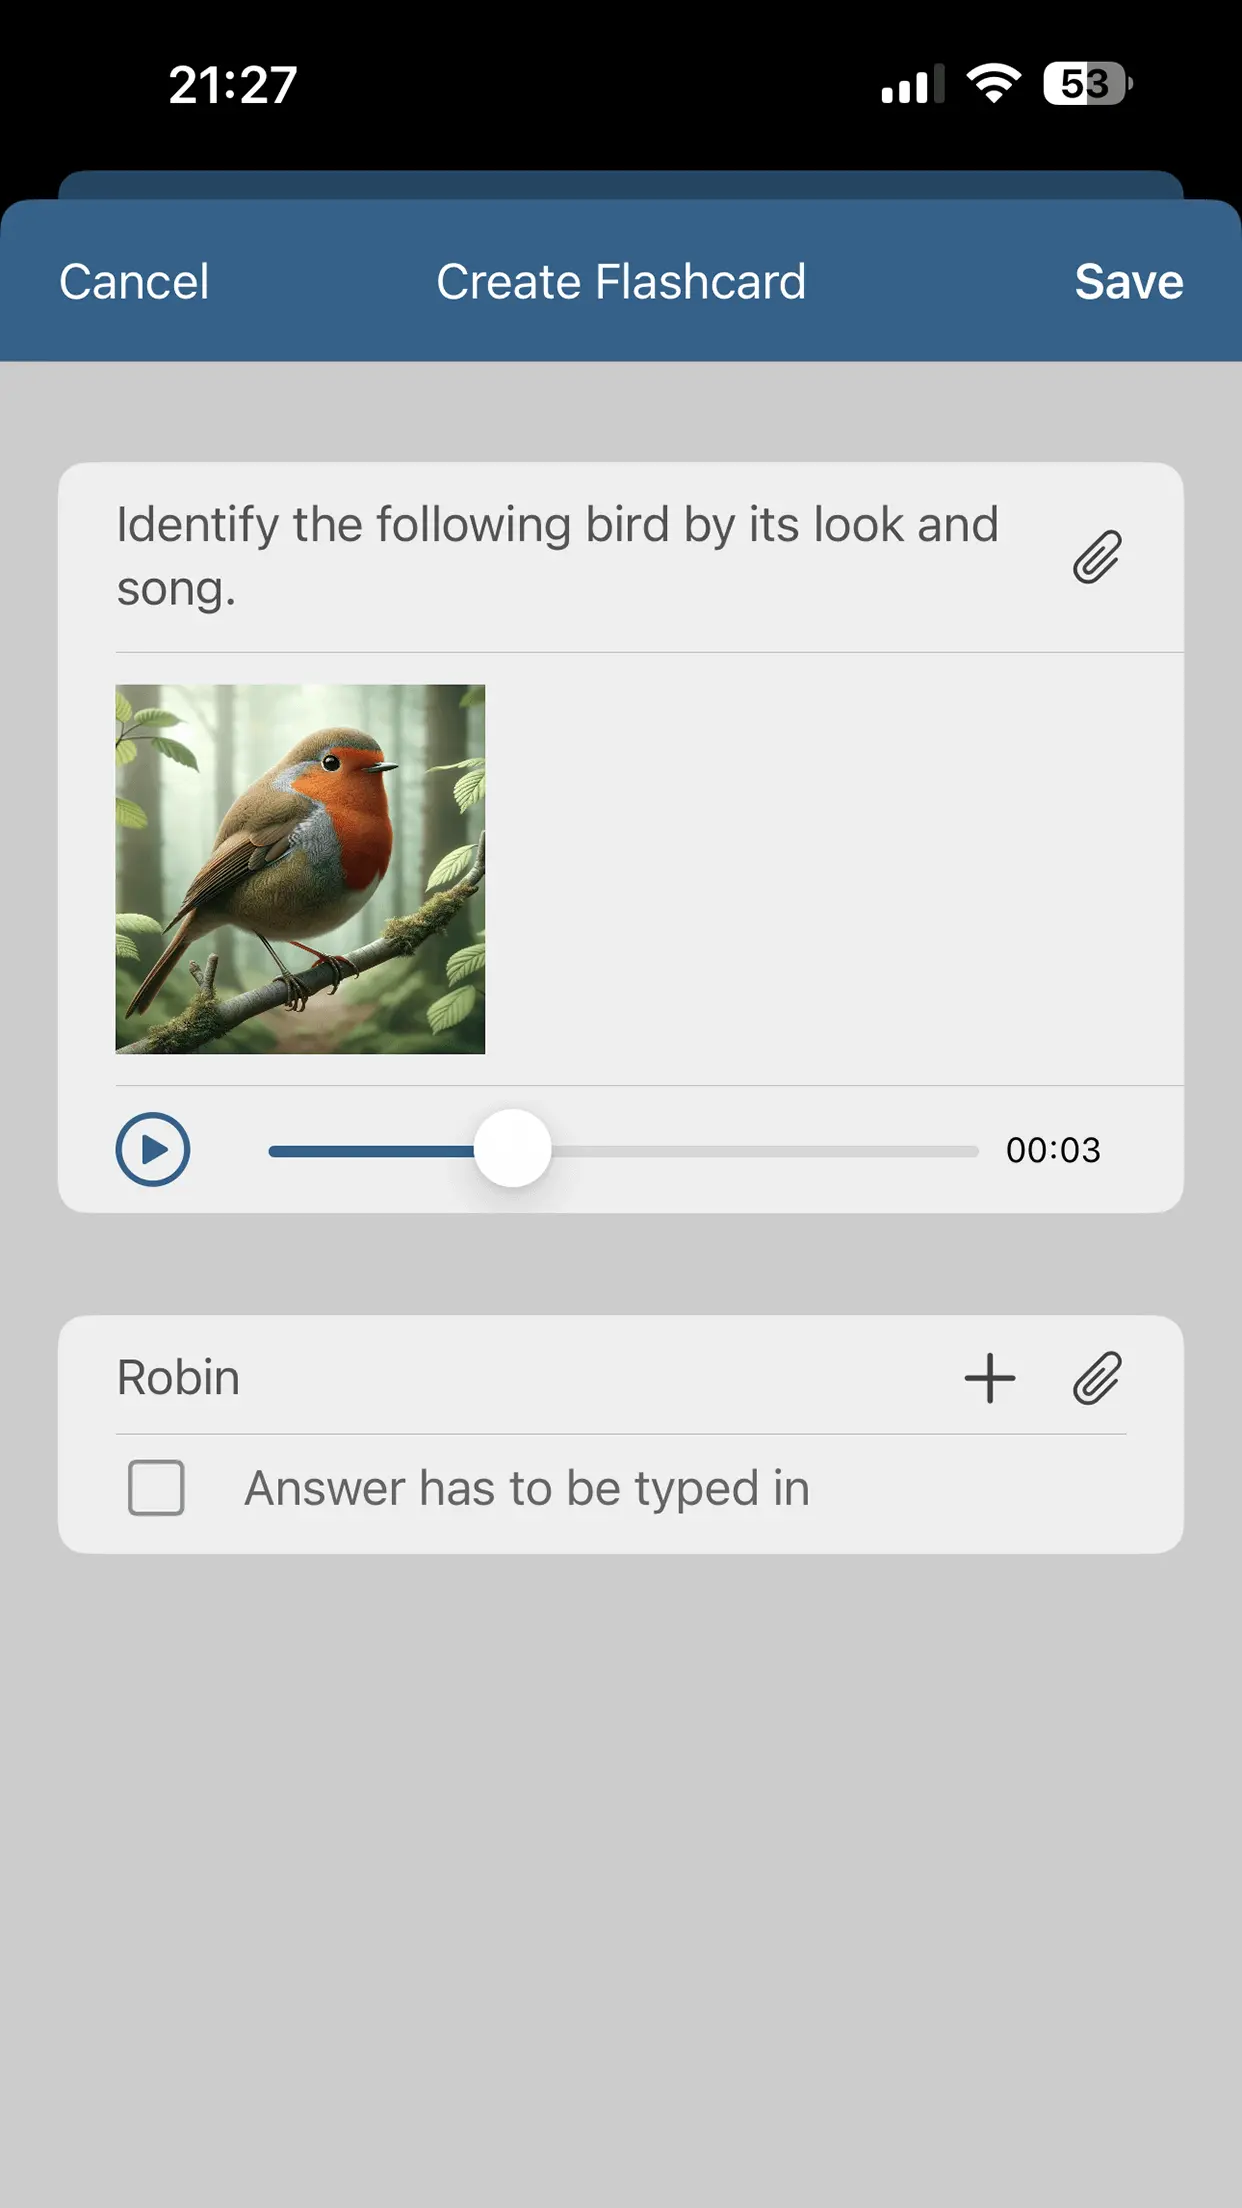 Flashcard with image and audio file.